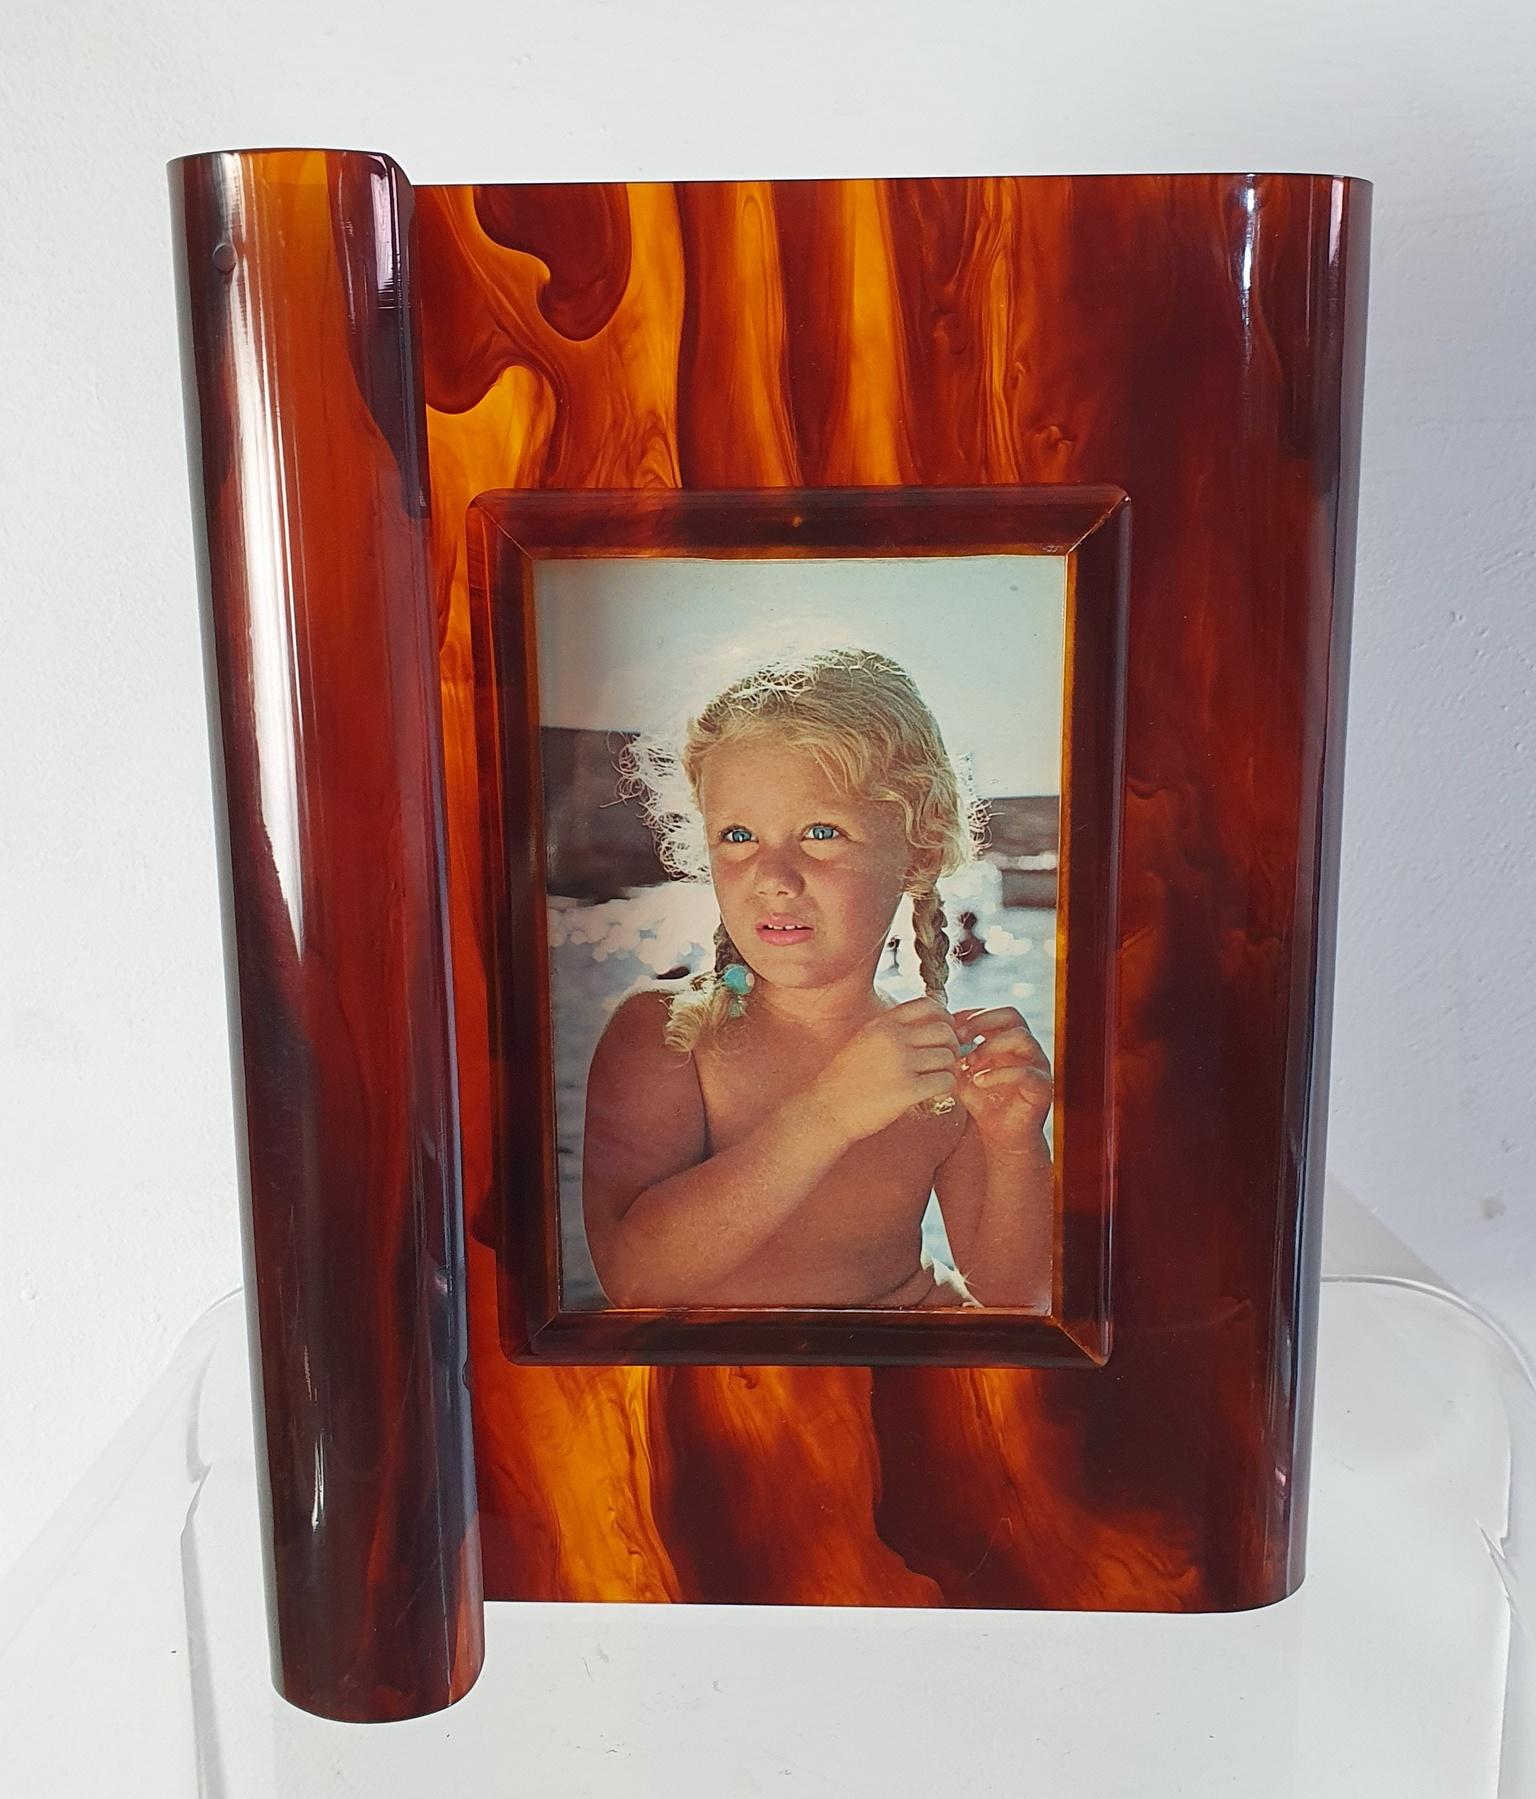 Art Deco style photo/picture frame in lucite faux tortoiseshell lucite with an S curved design. This piece seems to never have been used and appear as new. In very nice condition without scratches or breaks.